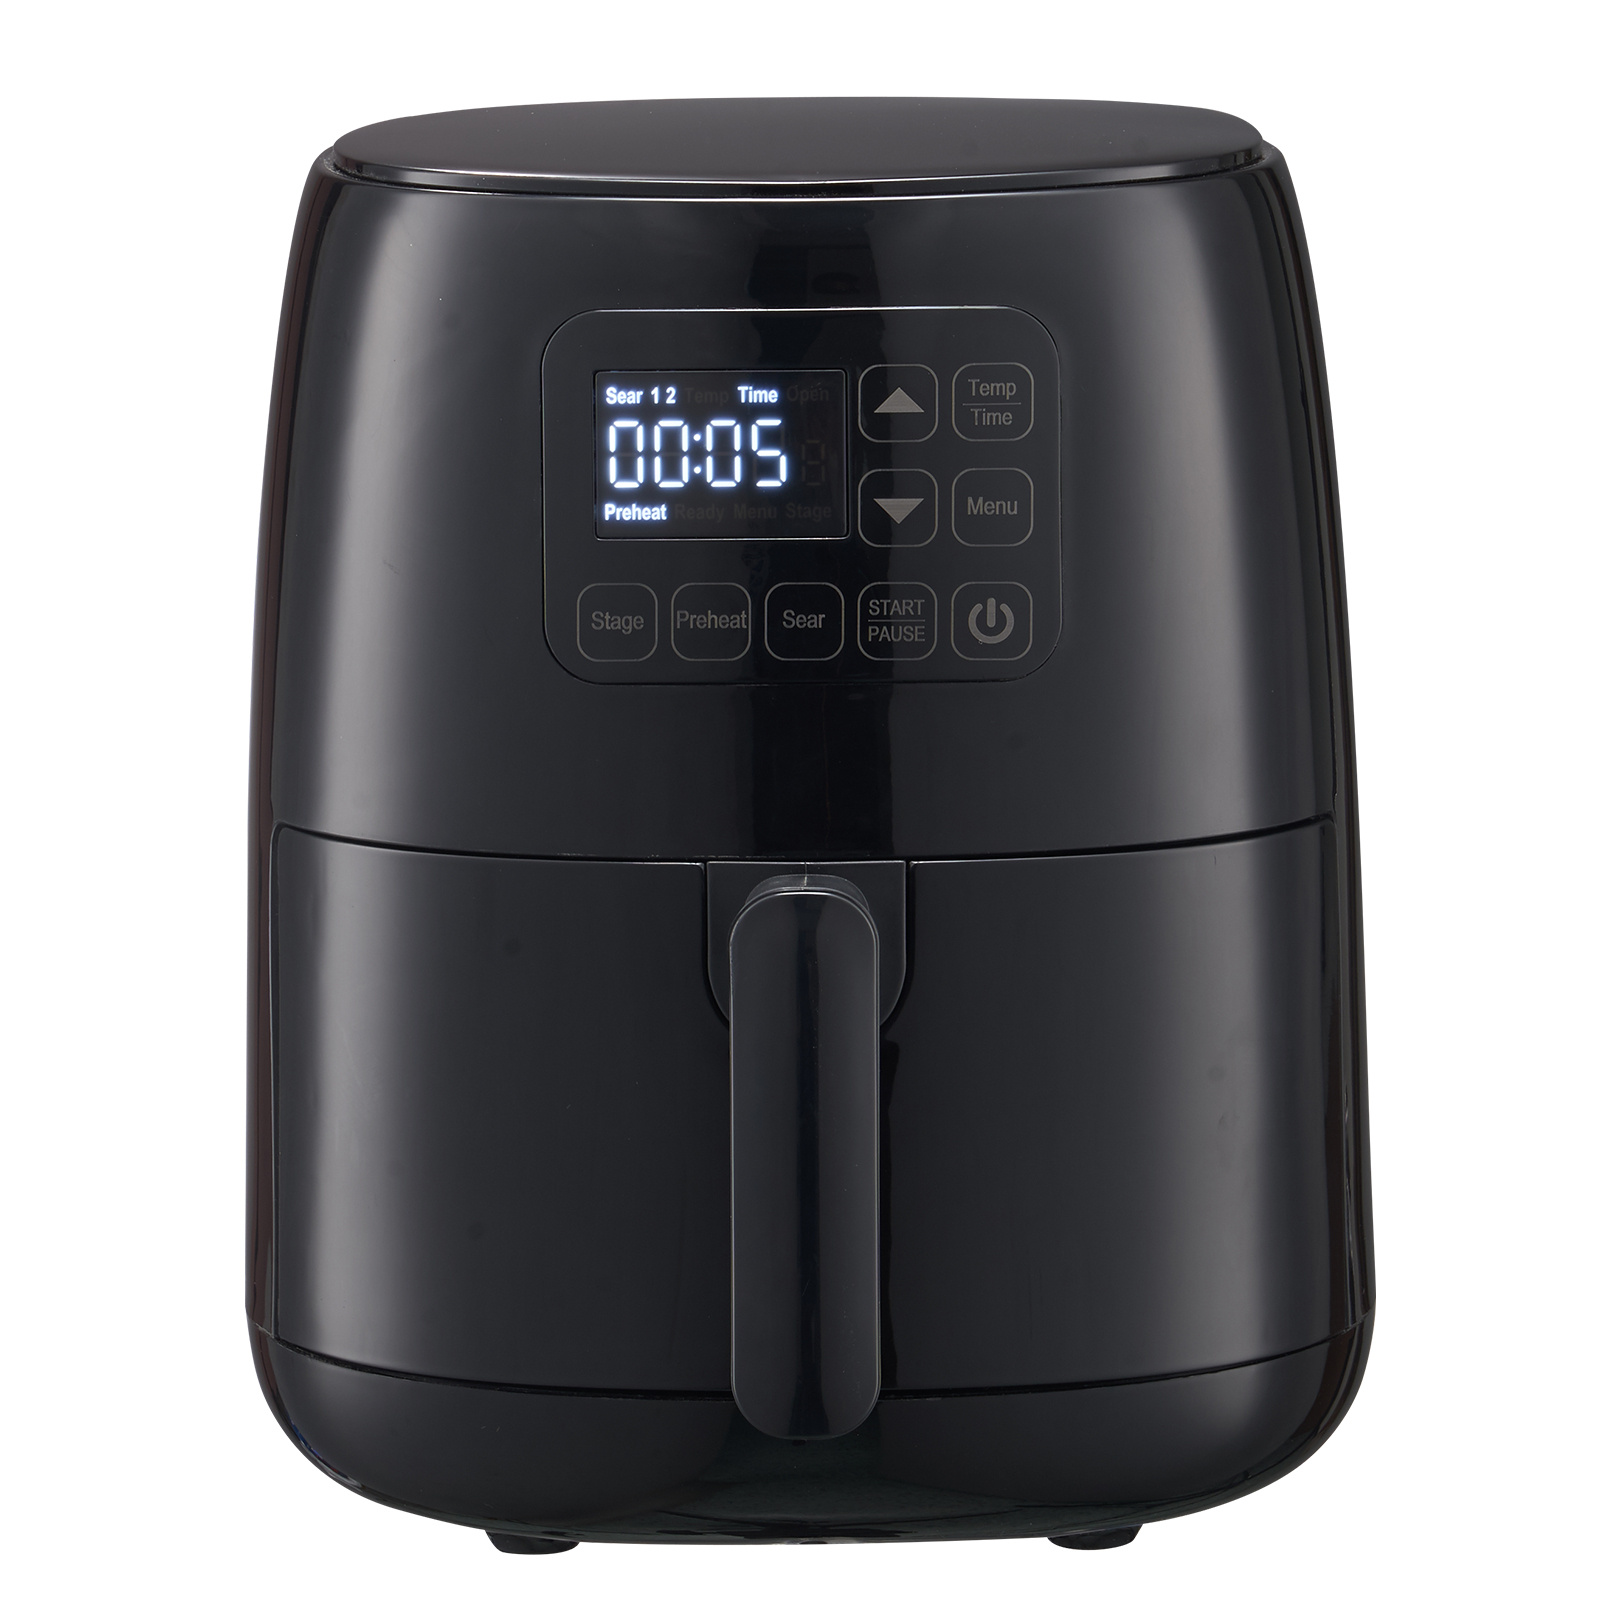 MOOSOO Small Air Fryer Oven 2Qt Oil-less Air Fryer with